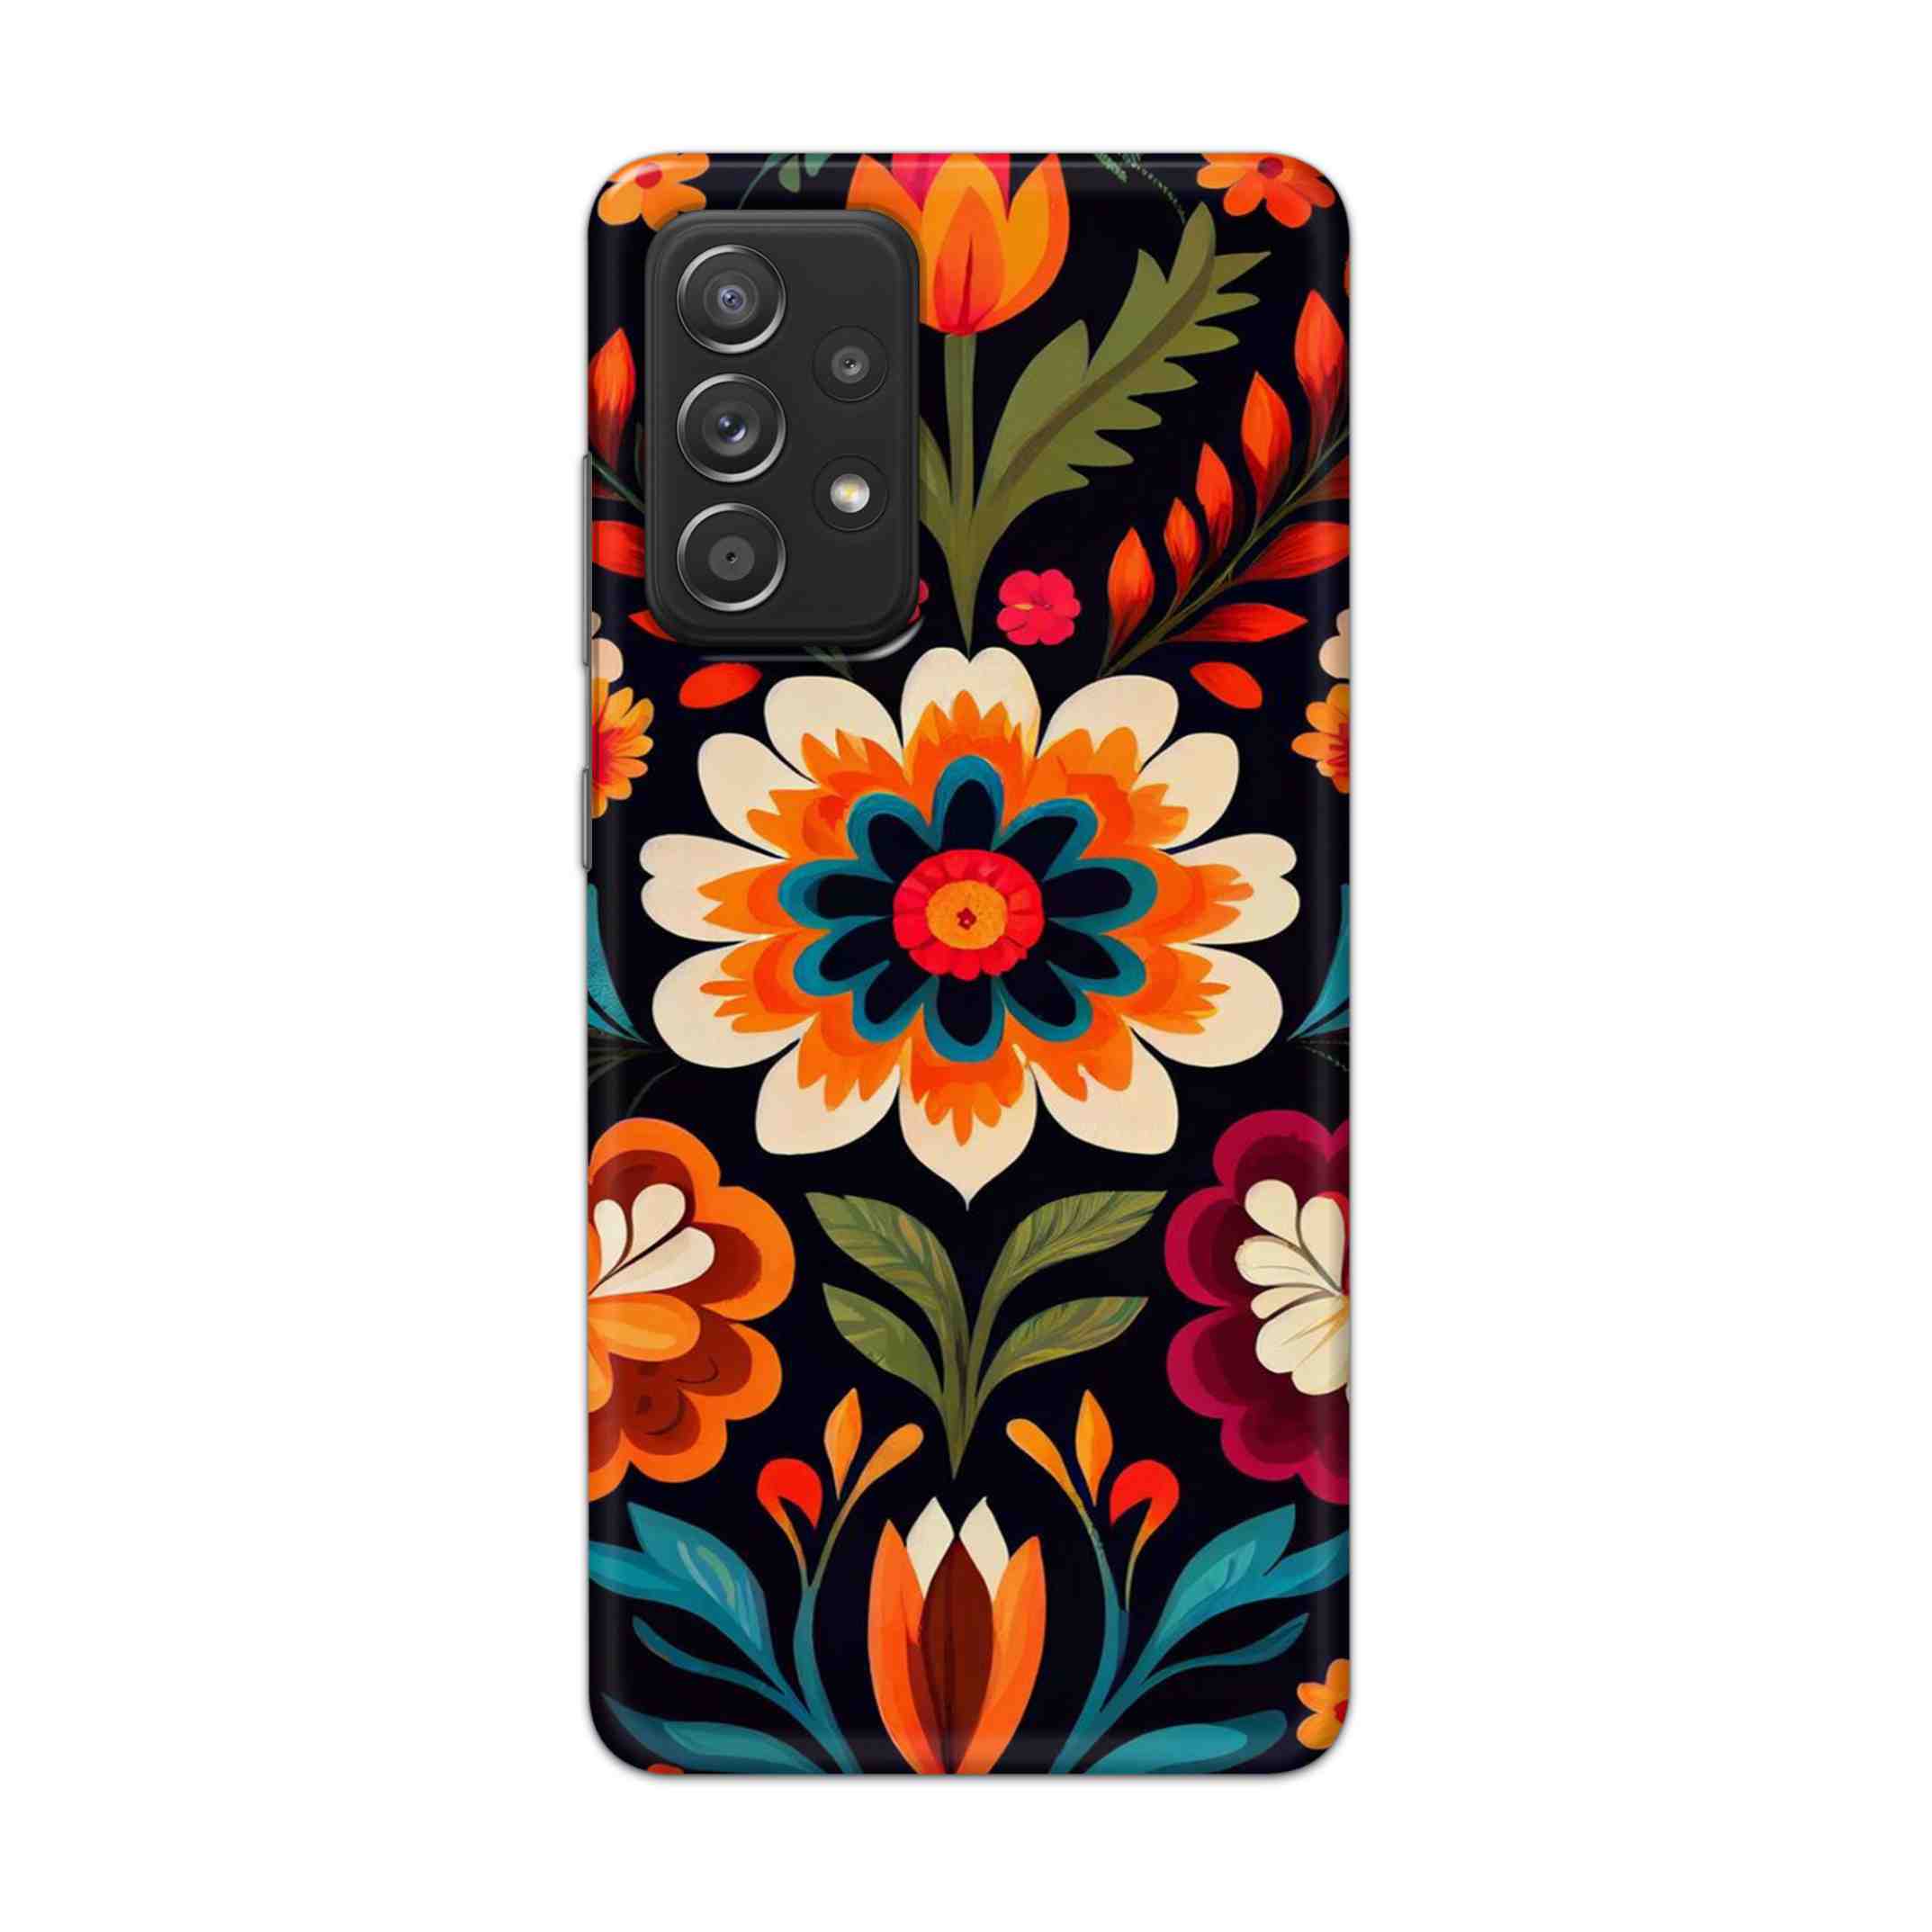 Buy Flower Hard Back Mobile Phone Case Cover For Samsung Galaxy A52 Online